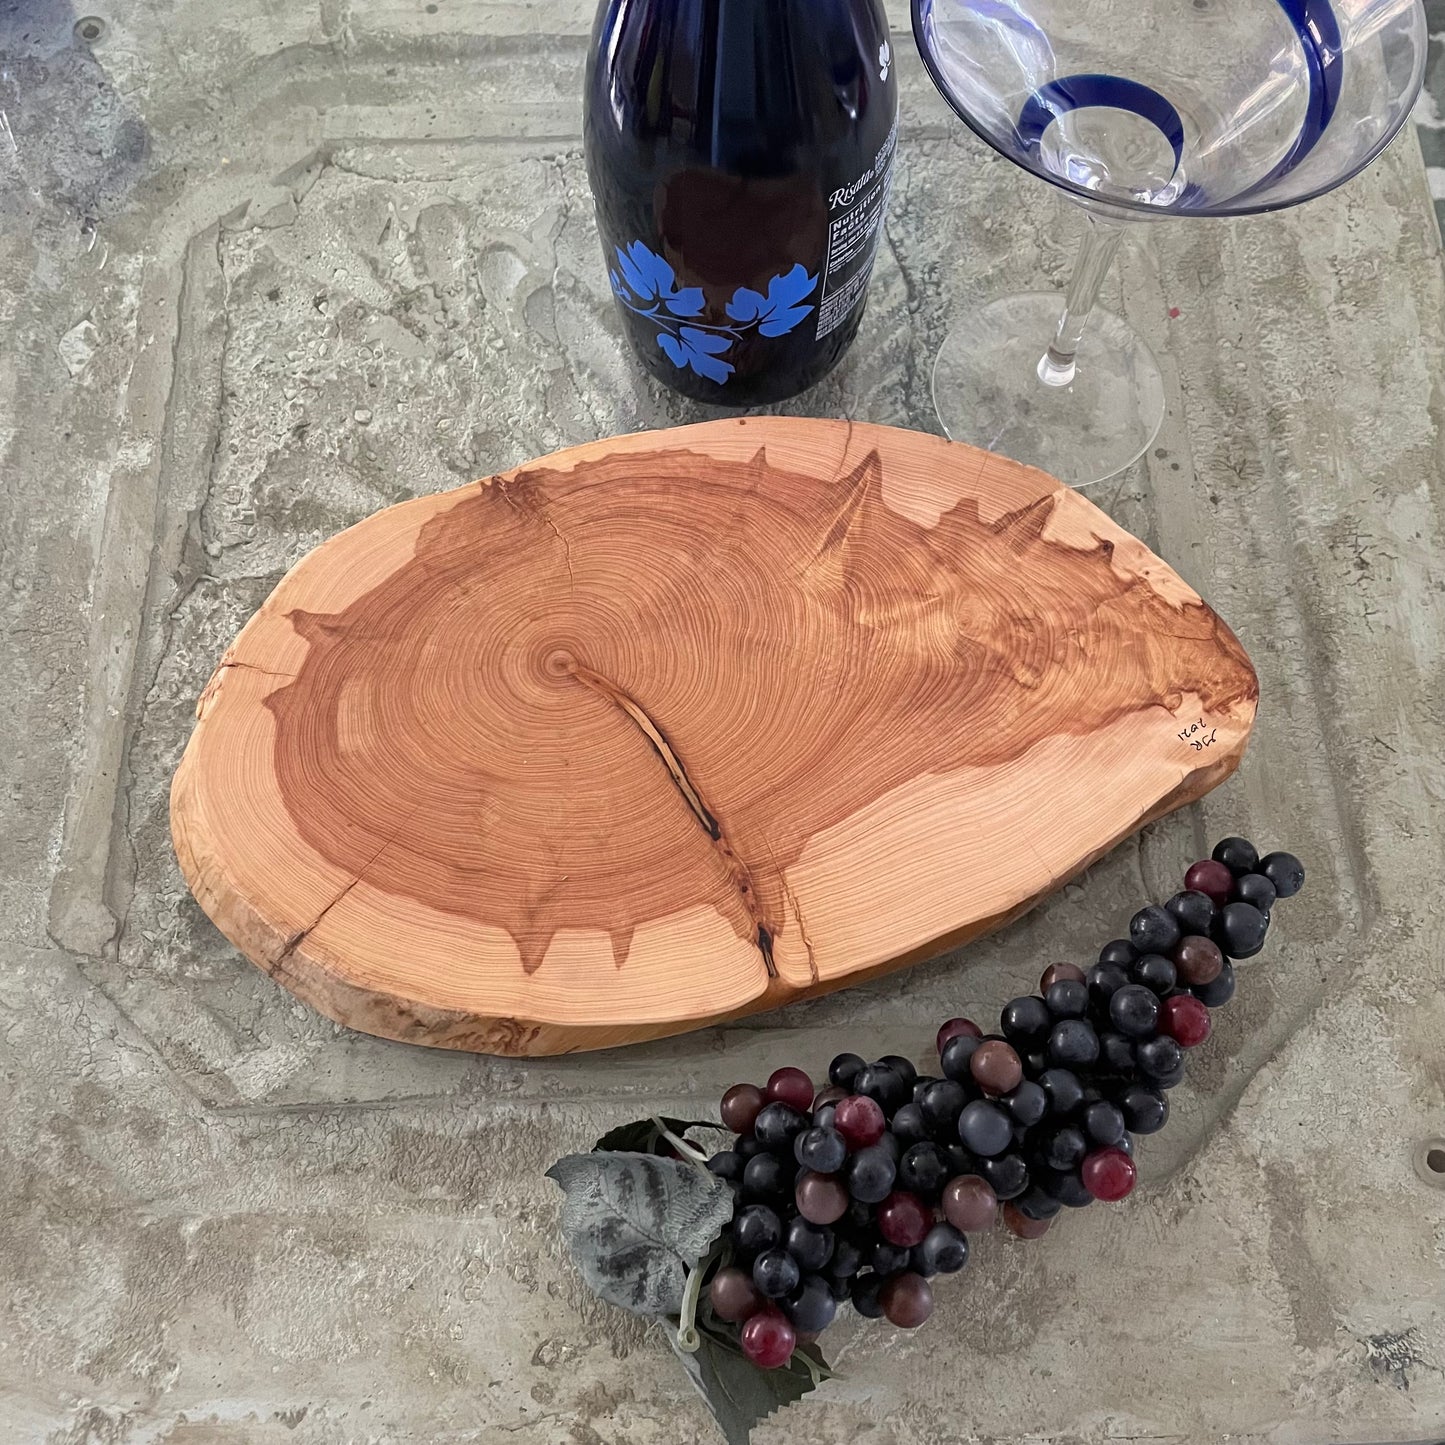 Live Edge Juniper Wood Charcuterie Board Medium Oval/12-13" Hand Crafted Entertaining Party Hosting Holiday Gift Idea Housewarming